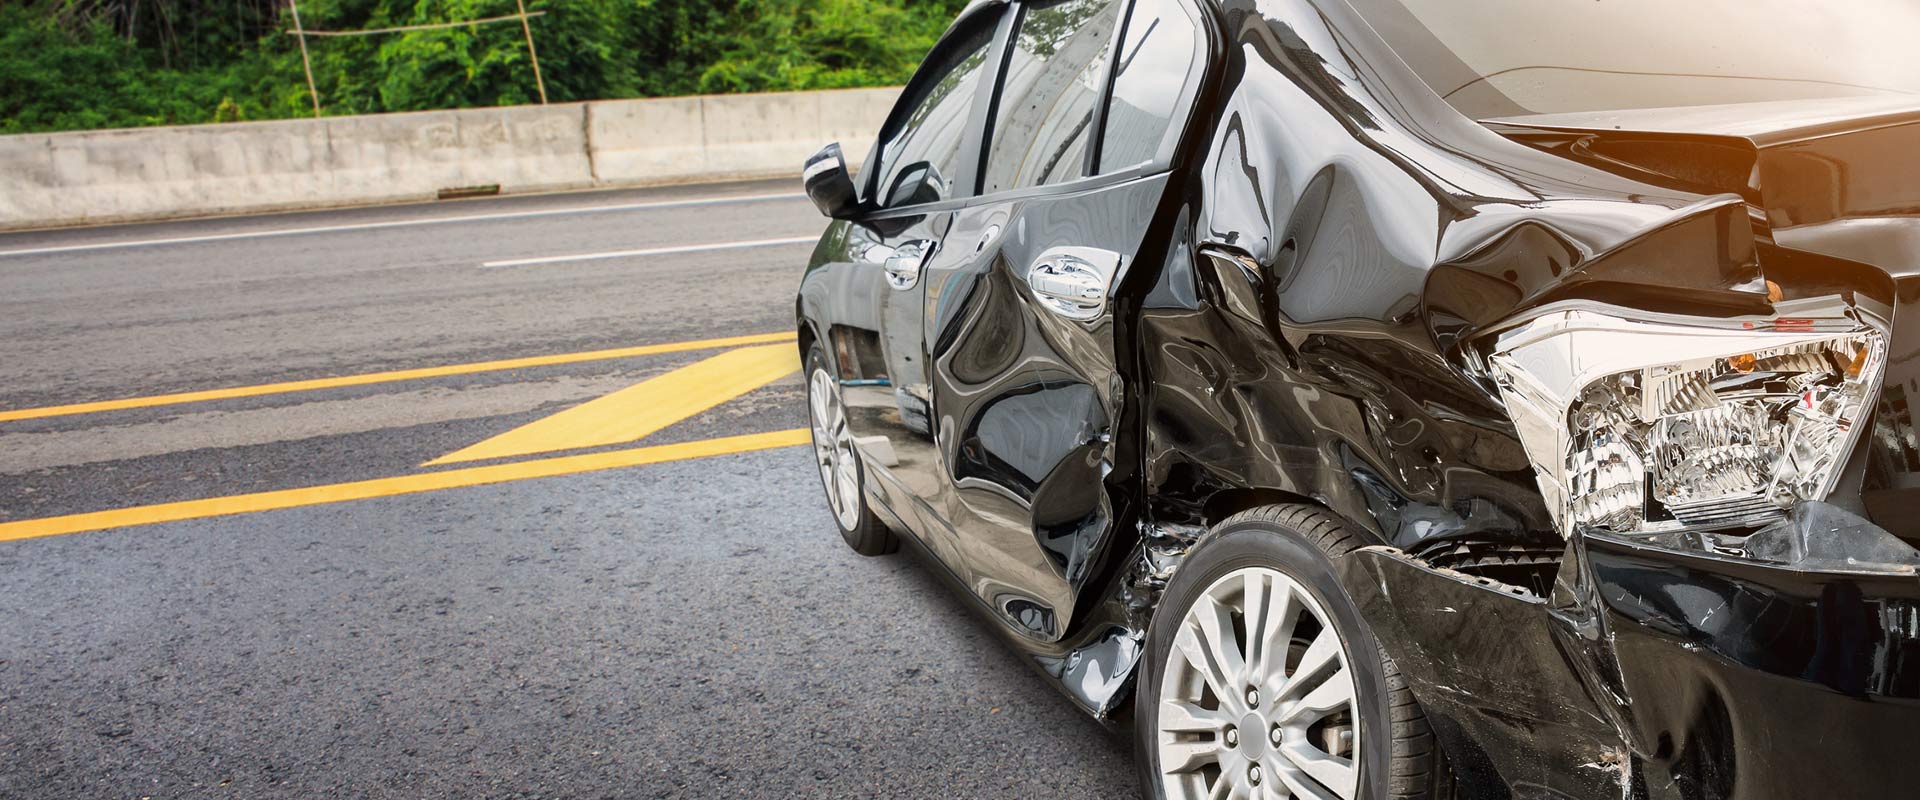 2020 Auto Accidents Increased – Even After Covid Shut Down Traffic